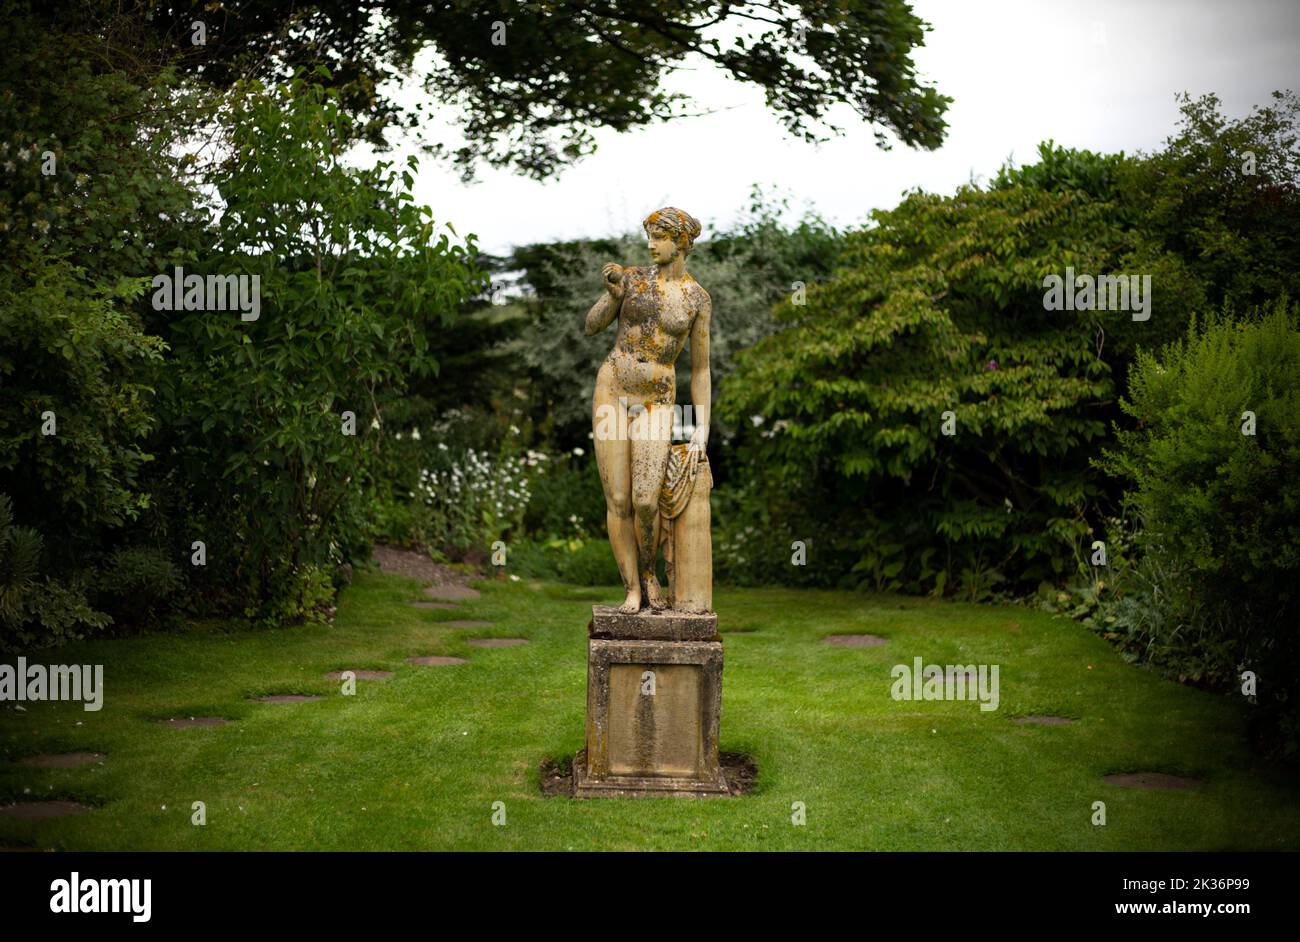 A statue in the grounds of Crook Hall and Gardens in County Durham.Crook Hall and Gardens closed in 2020 and the former owners approached the National Stock Photo